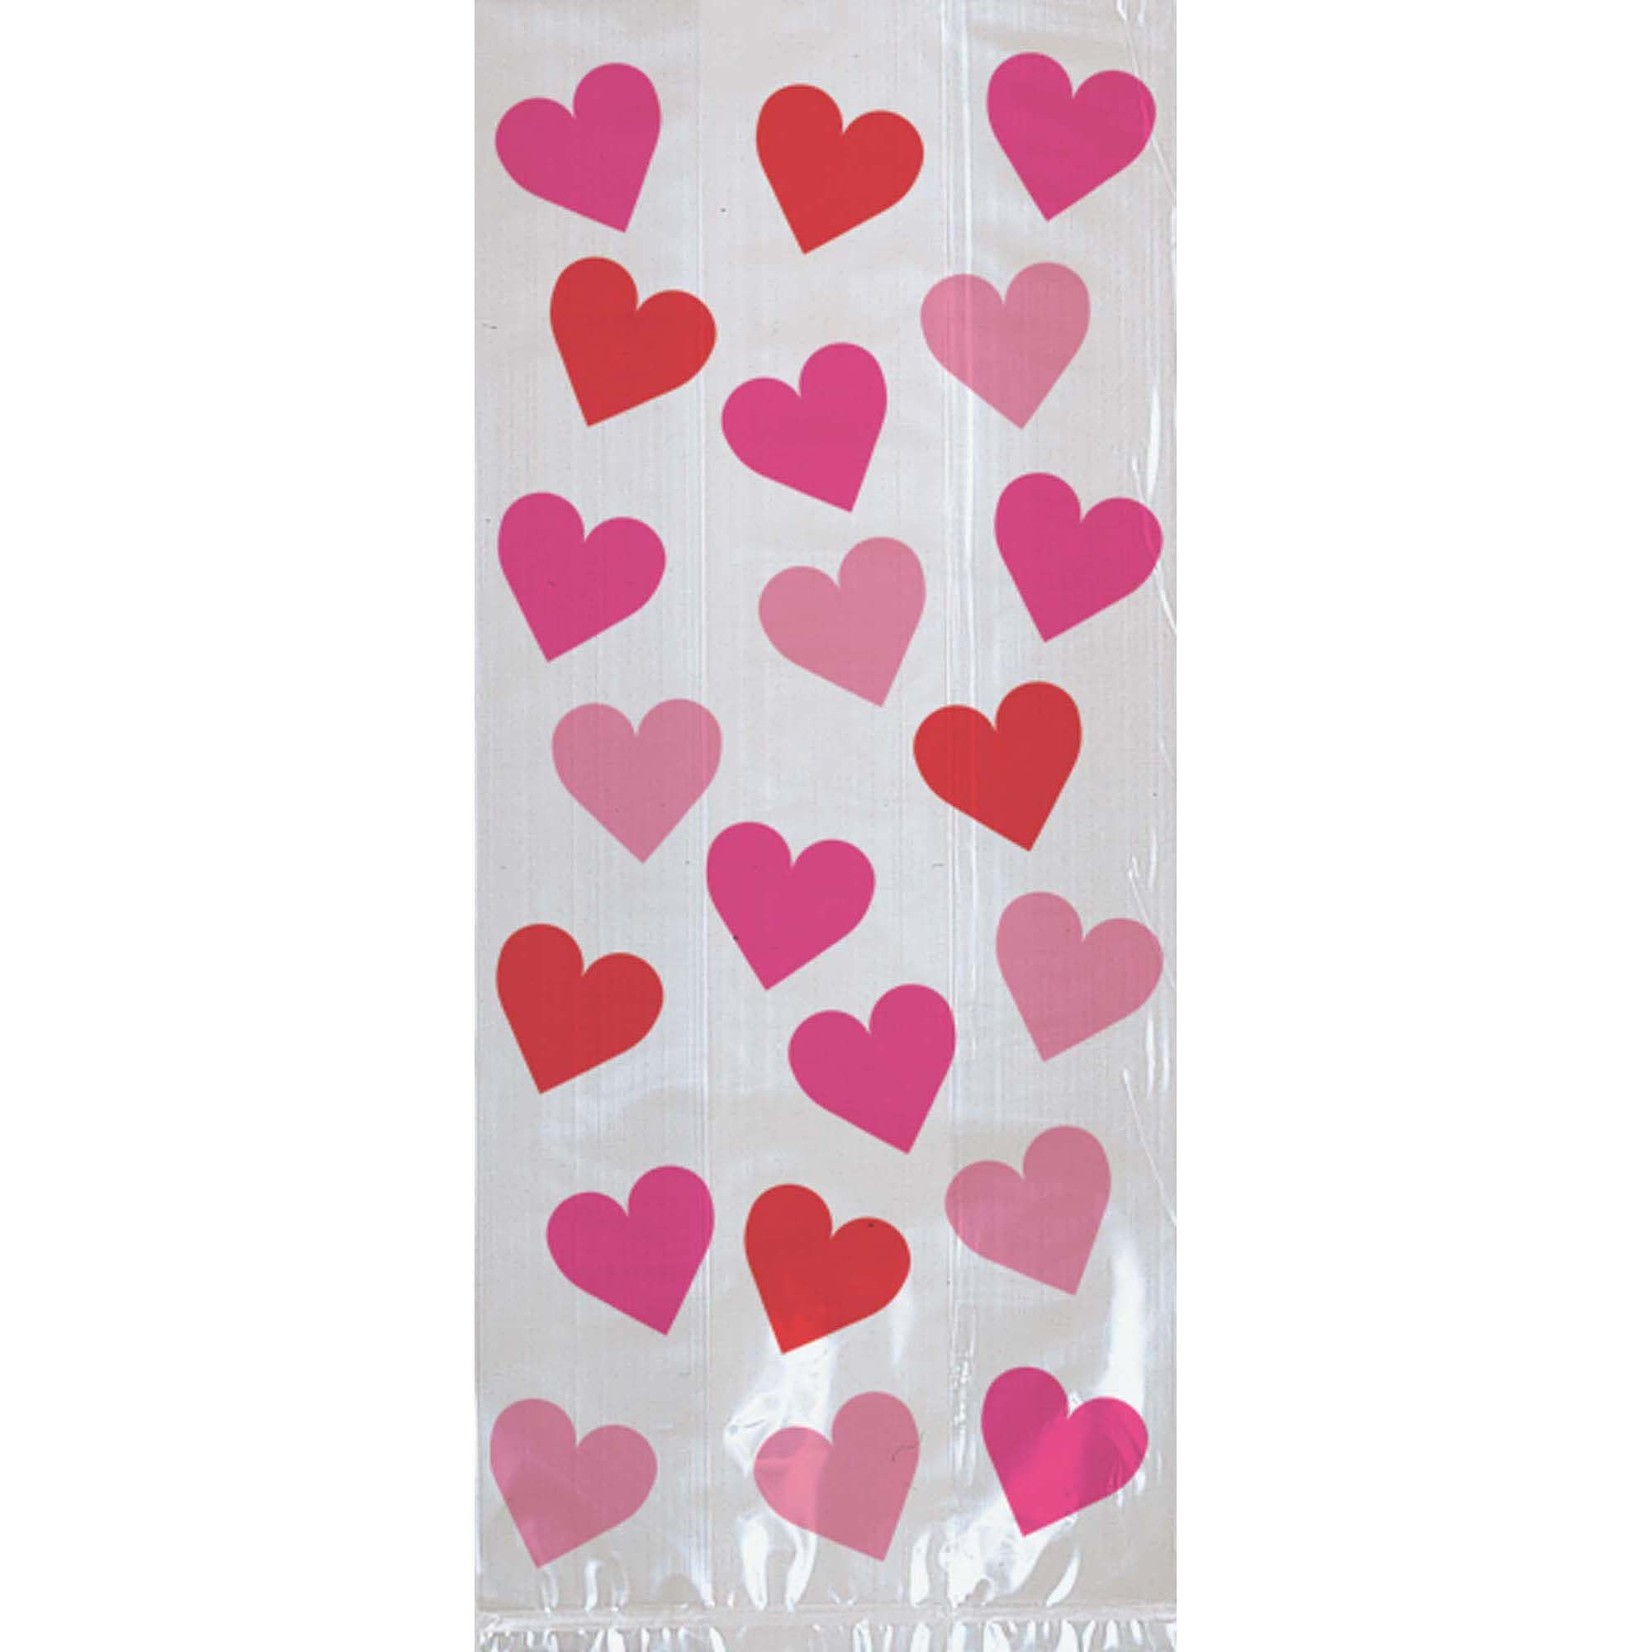 Amscan Large Pink Hearts Cellophane Bags w/ Ties - 20ct. (11"h x 5"w)